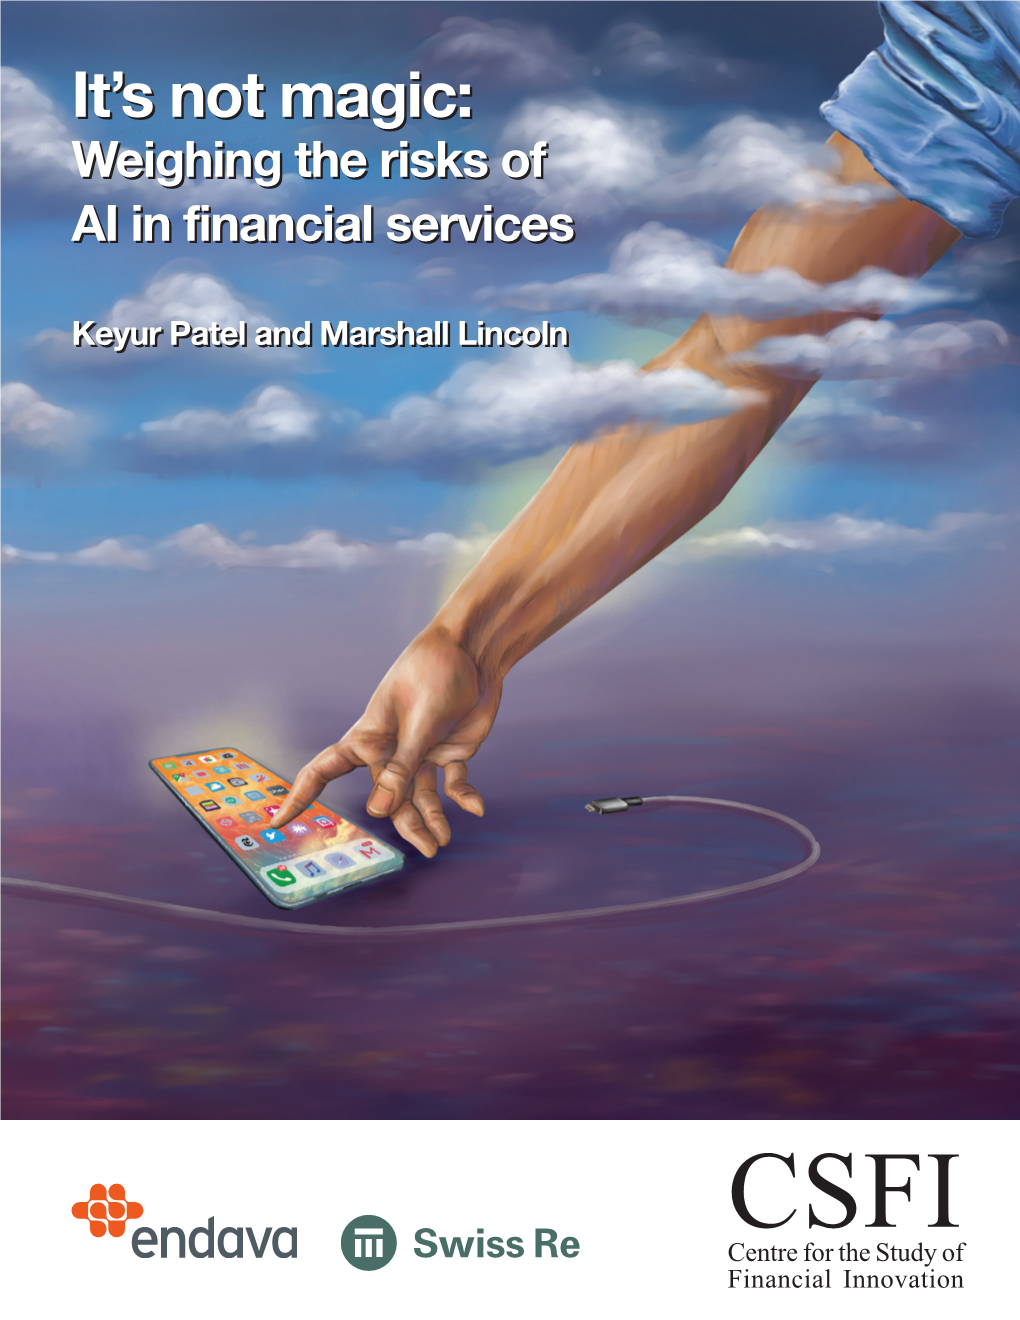 It's Not Magic: Weighing the Risks of AI in Financial Services